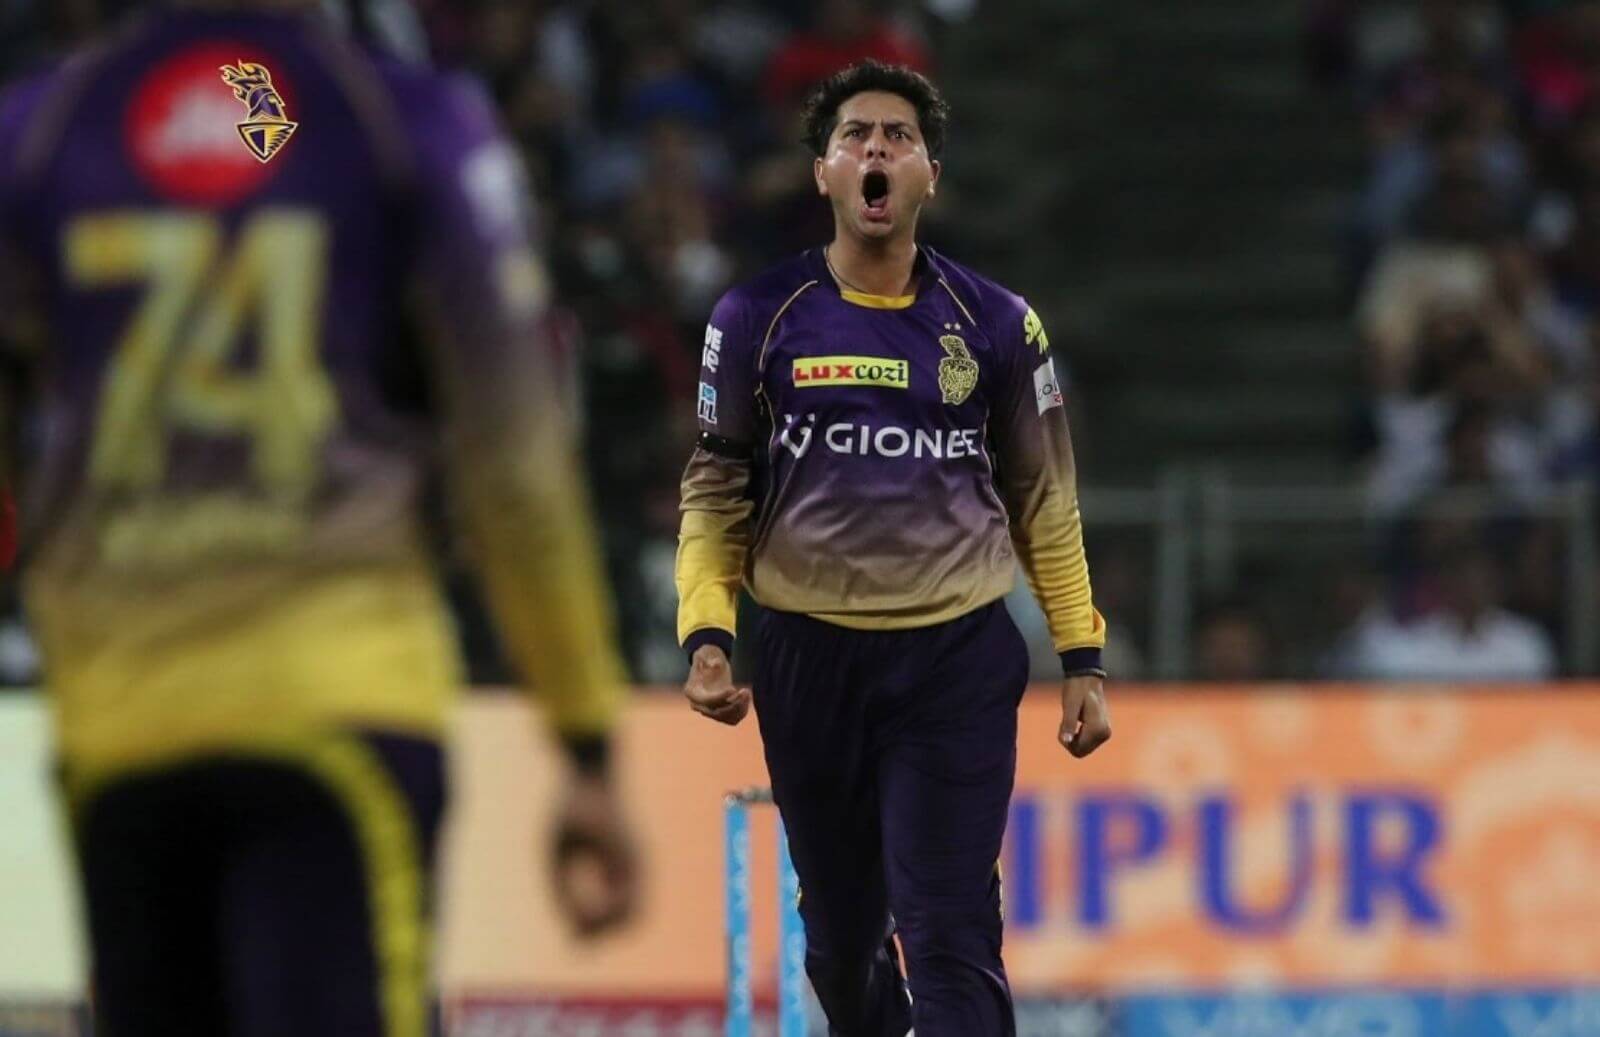 Kuldeep Yadav Says Pressure Will Be On Spinners To Do Well In IPL 2020